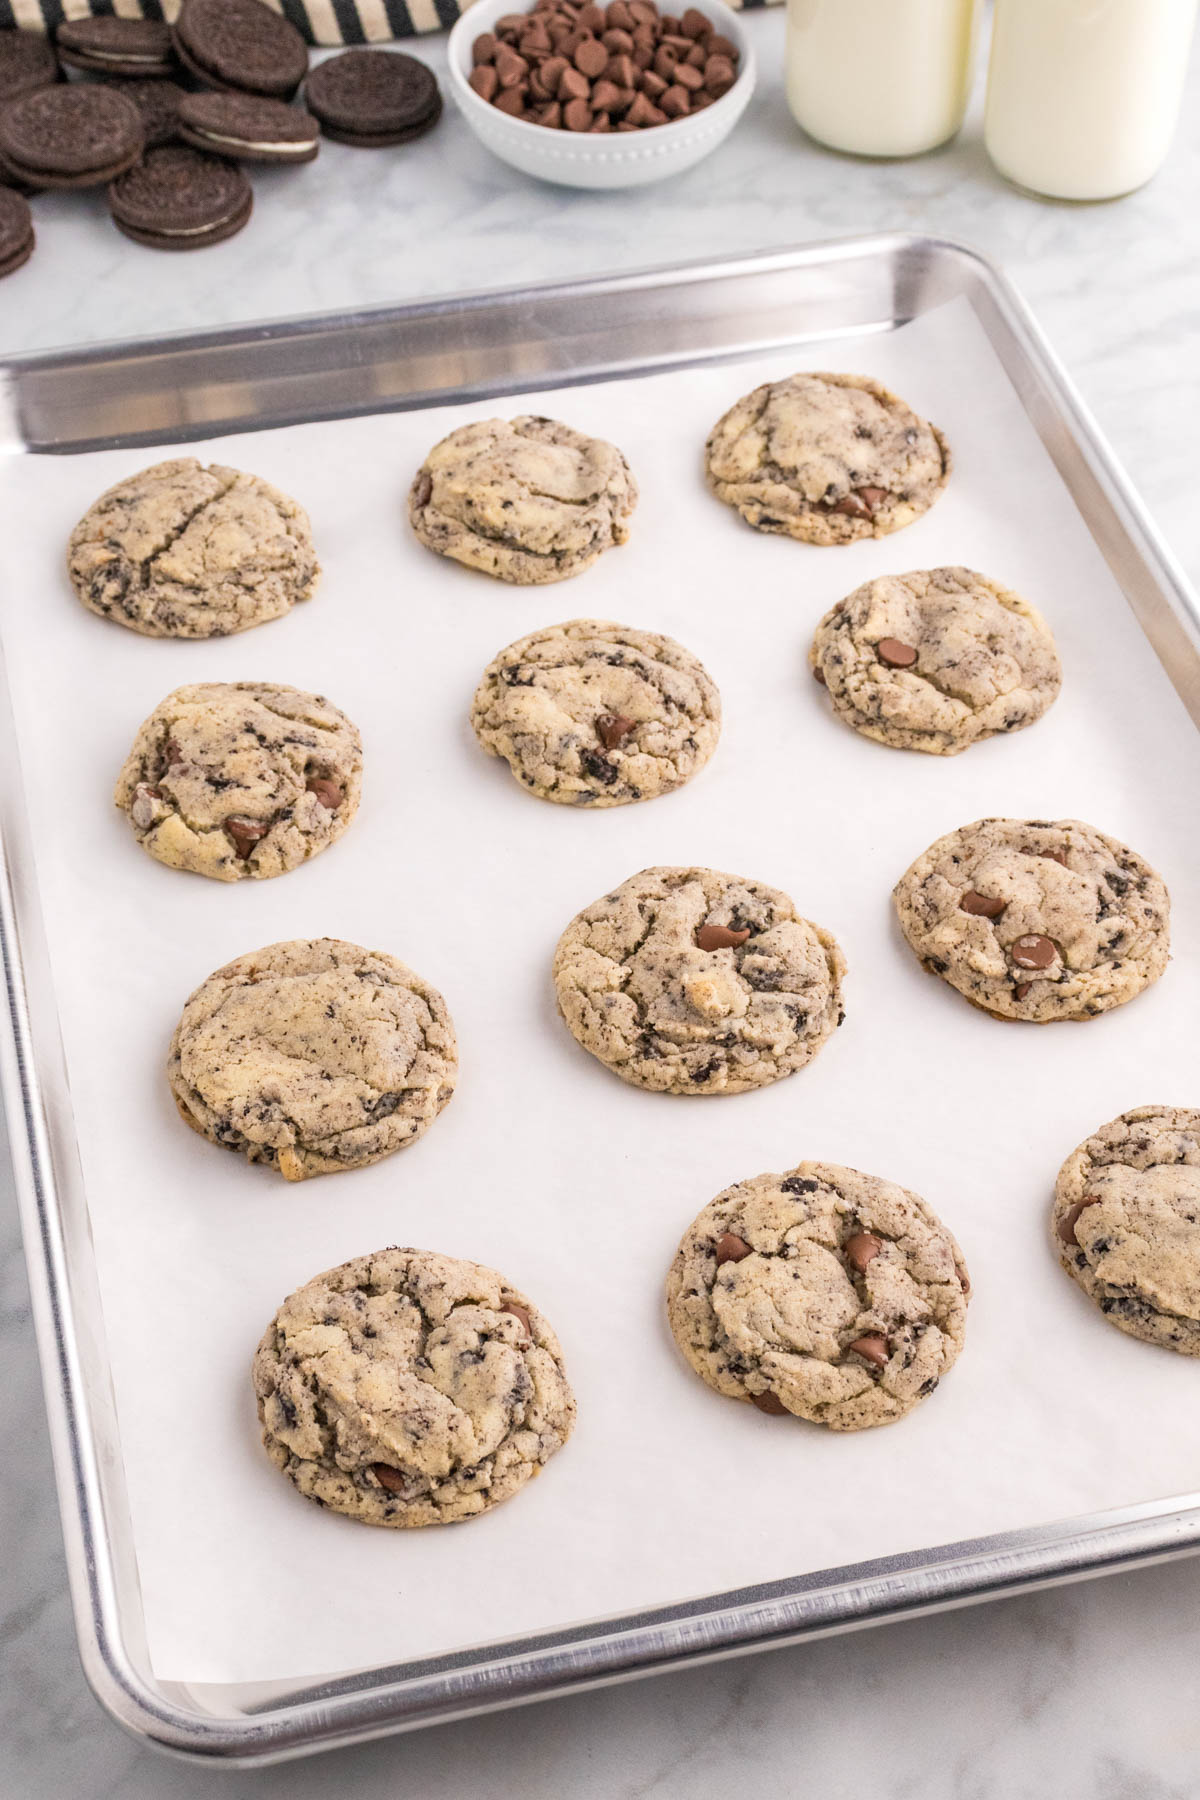 Freshly baked cookies with chocolate chips and chunks on a baking tray.